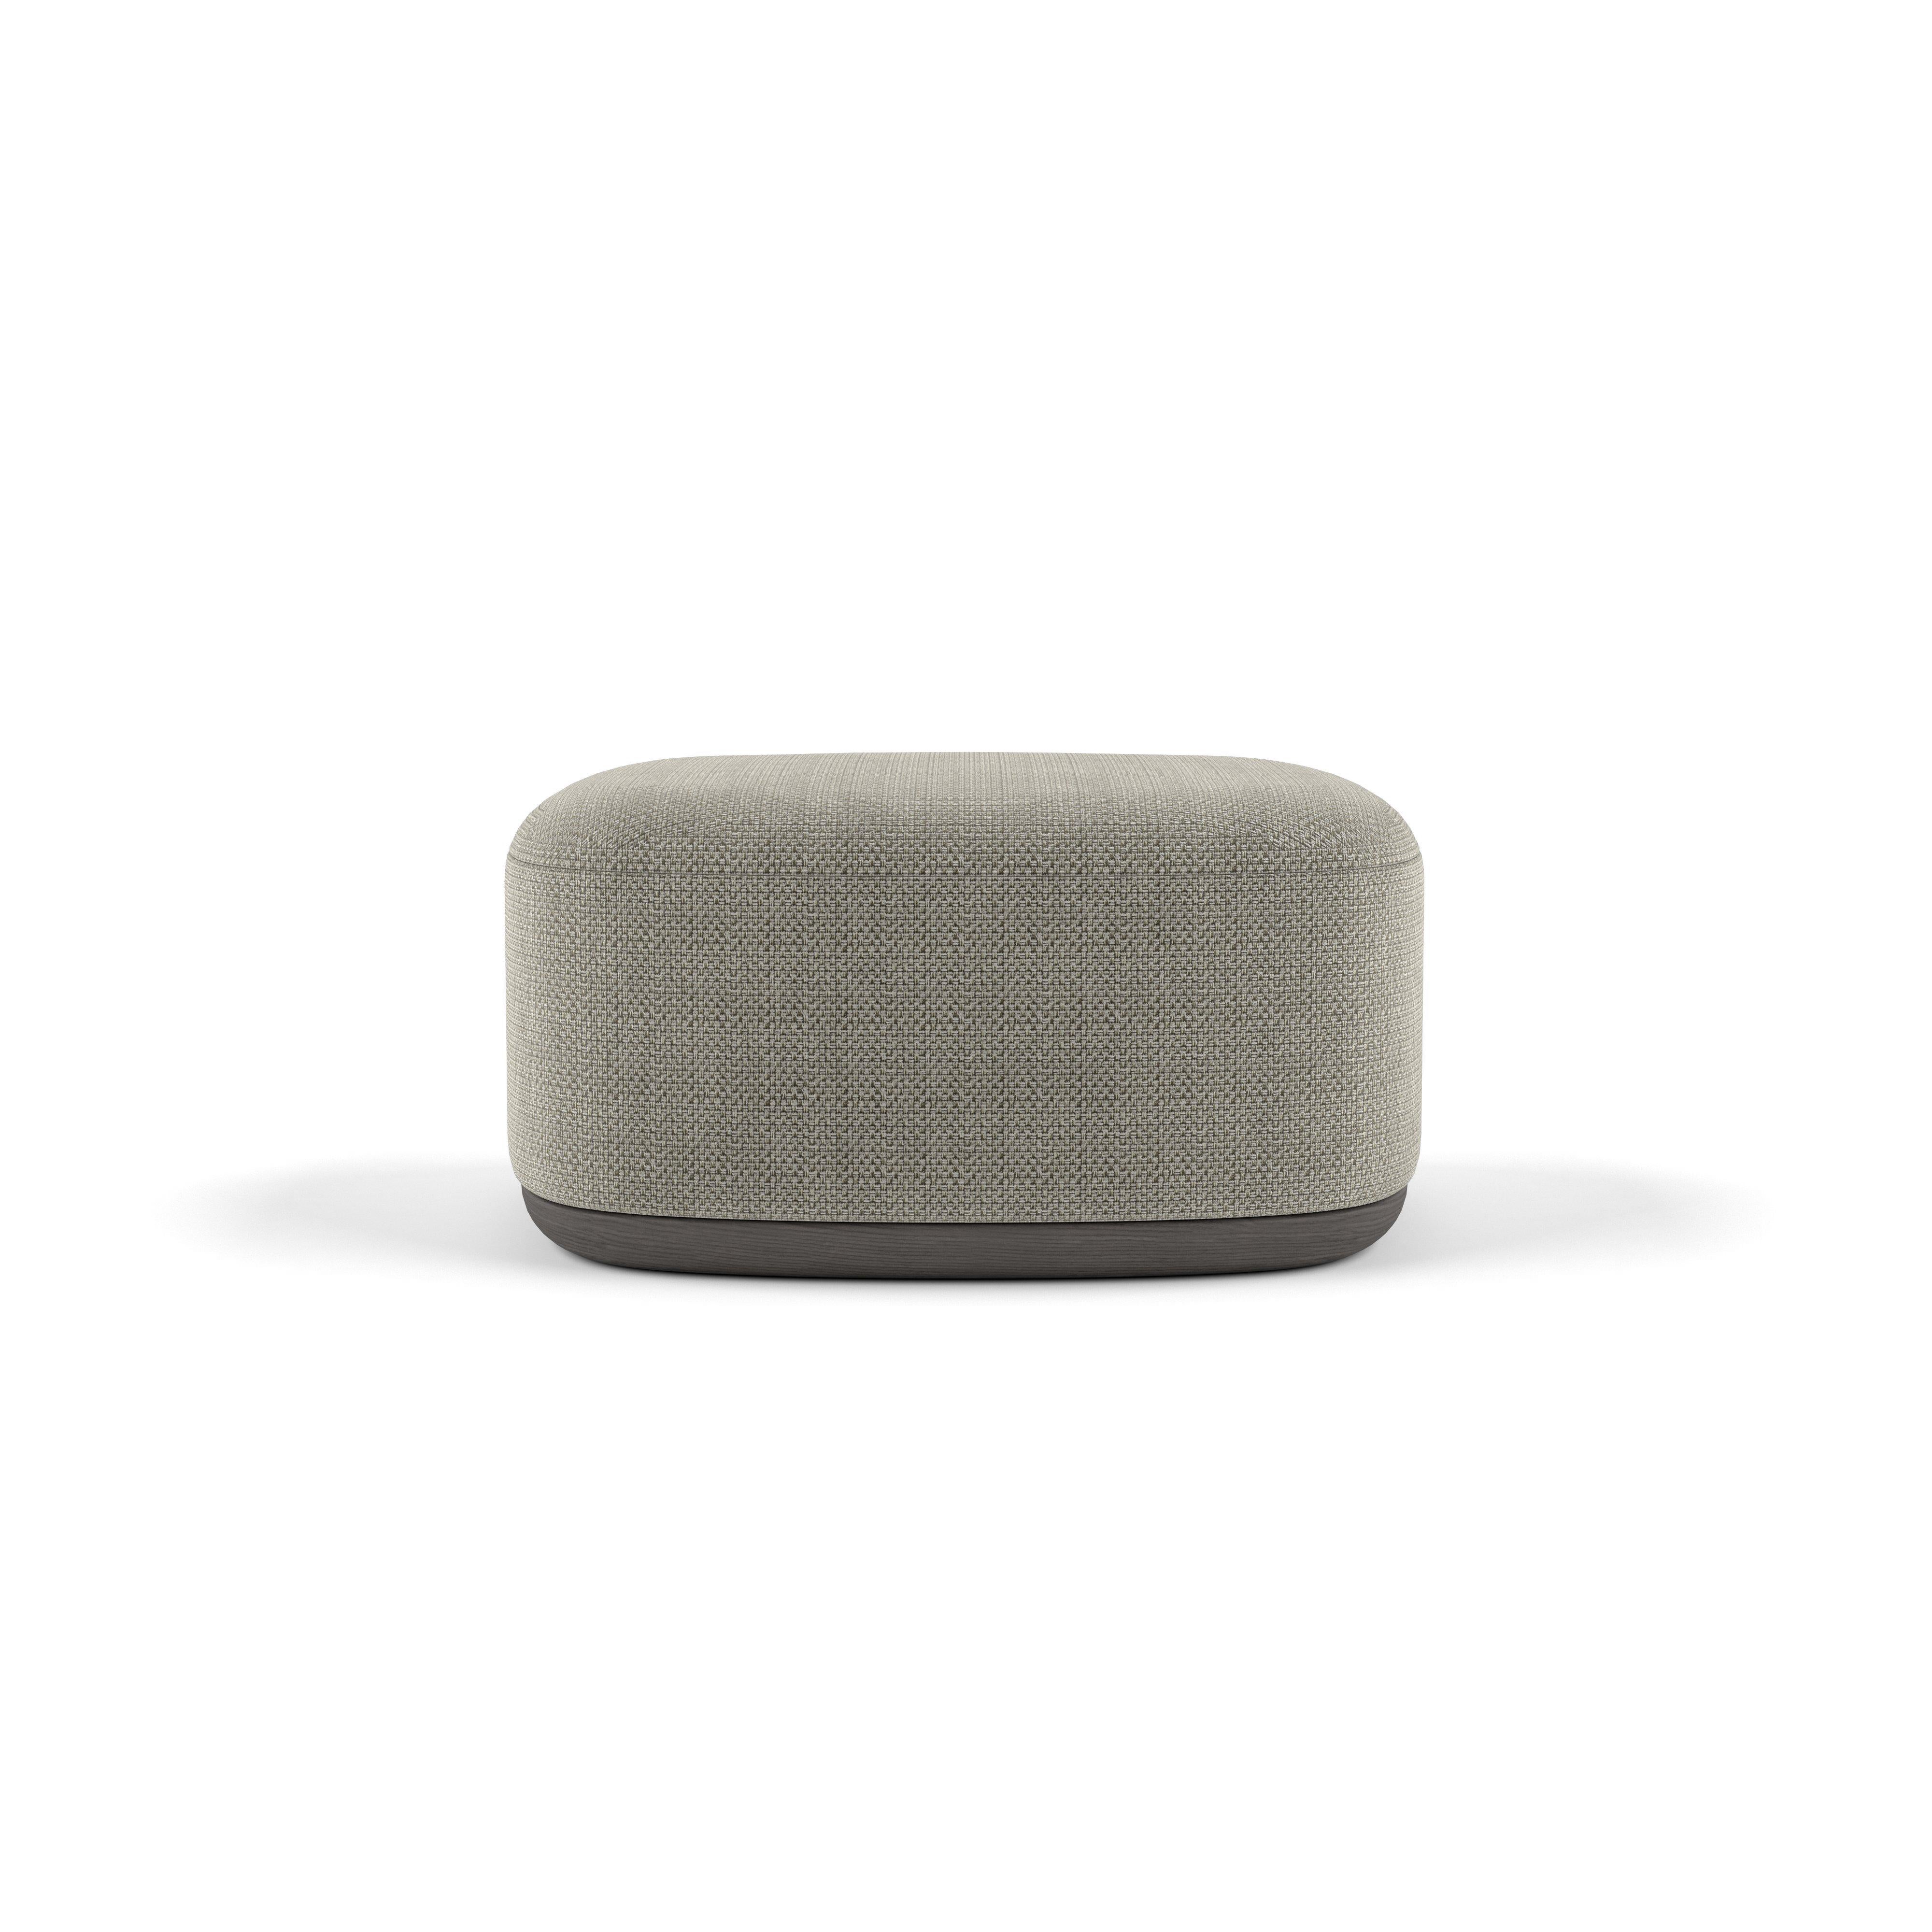 Unio Ottoman by Poiat 
Designers: Timo Mikkonen & Antti Rouhunkoski 

Collection UNIO 2023

Dimensions: H. 40 x W. 75 D. 72 cm SH. 40 
Model shown: Cat 3. Hanoi 04 by Pierre Frey
 
The Unio Collection, featuring an armchair, ottomans, sofas, marks a